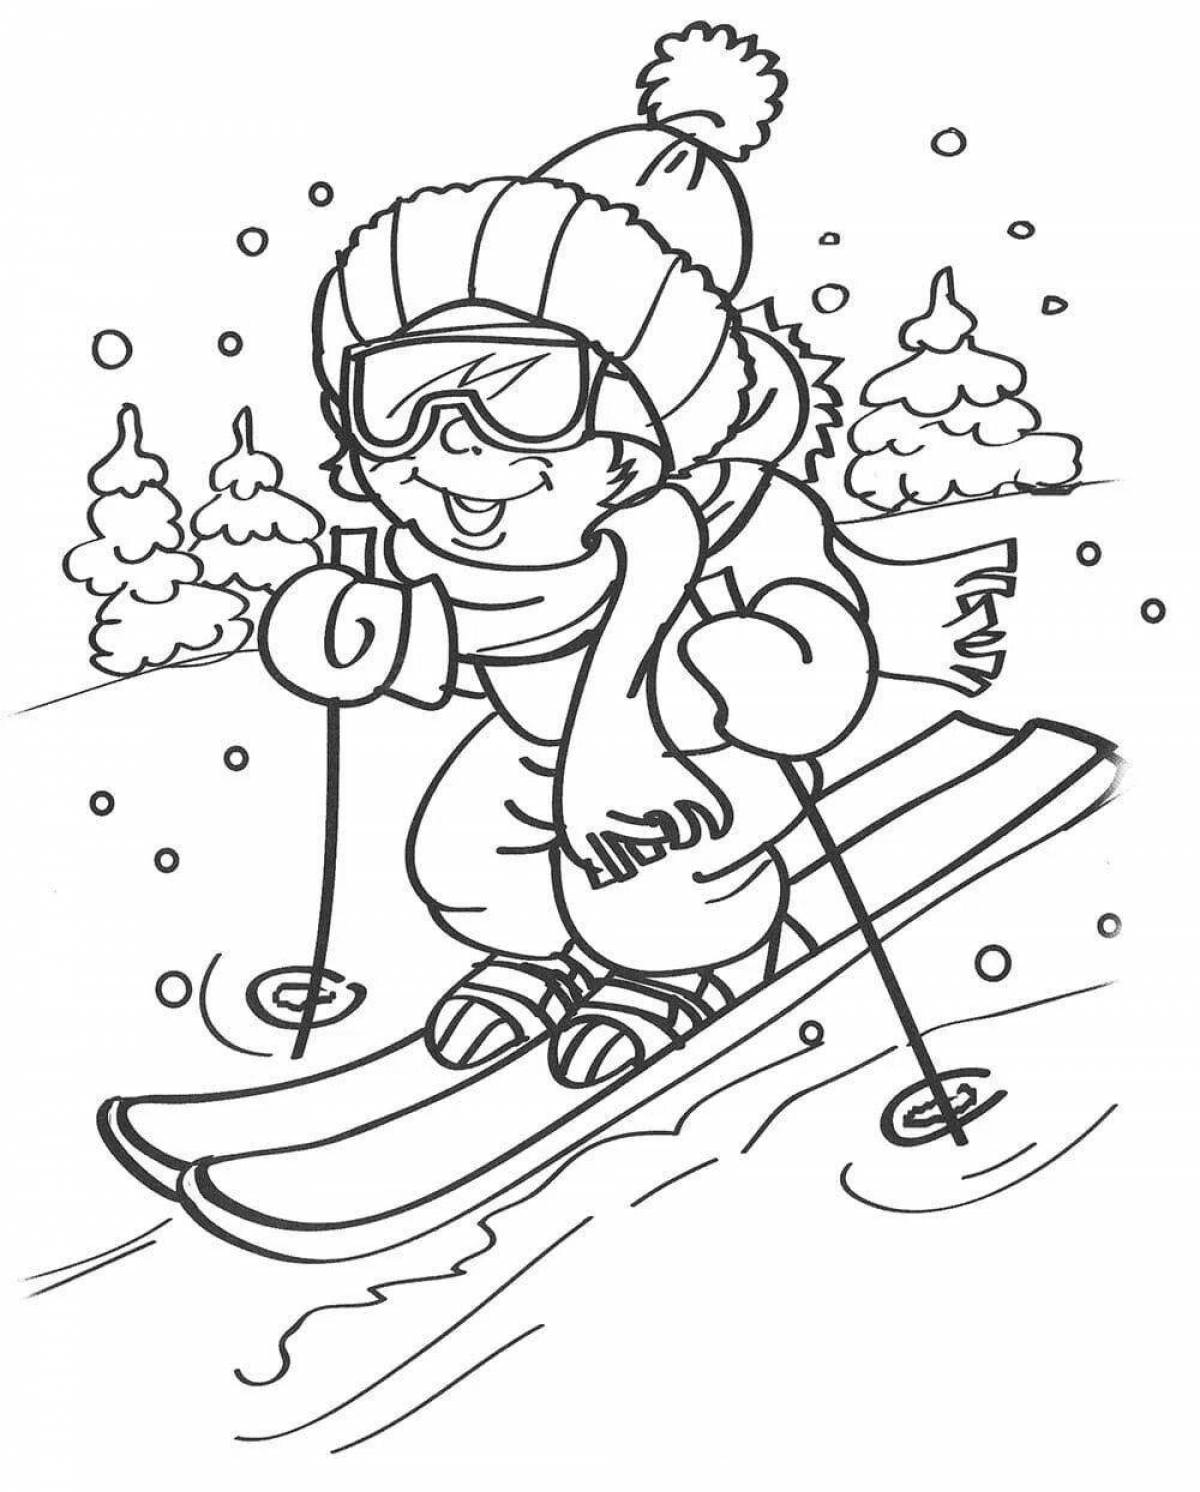 Exciting coloring book for winter sports on a dhow